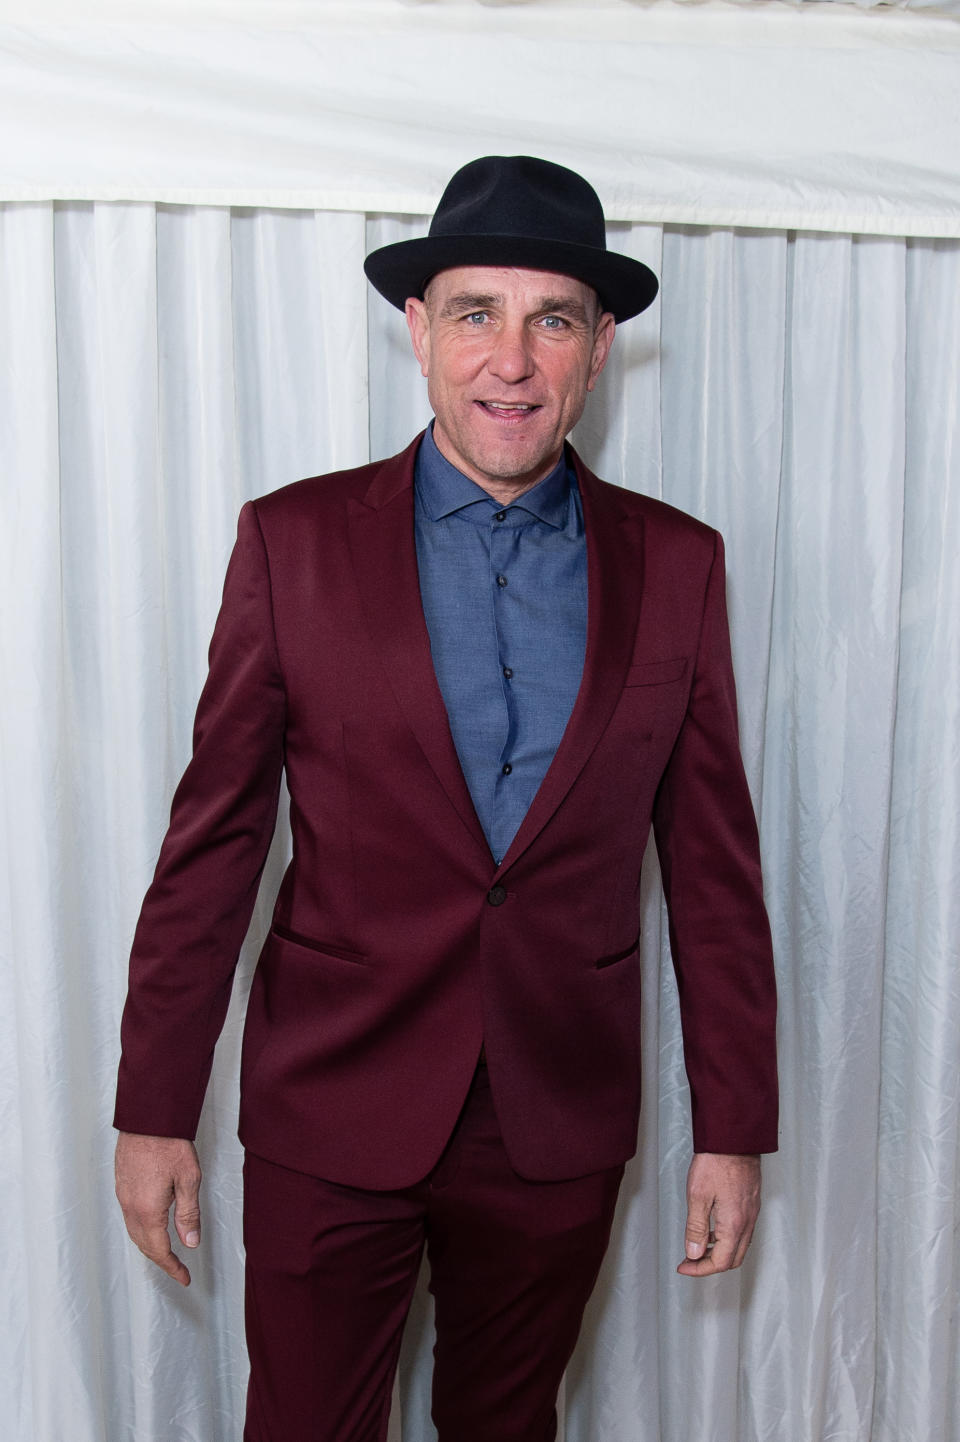 LONDON, ENGLAND - NOVEMBER 30: Vinnie Jones backstage at the "X Factor Celebrity " Final at LH2 Studios on November 30, 2019 in London, England. (Photo by Jeff Spicer/Getty Images)